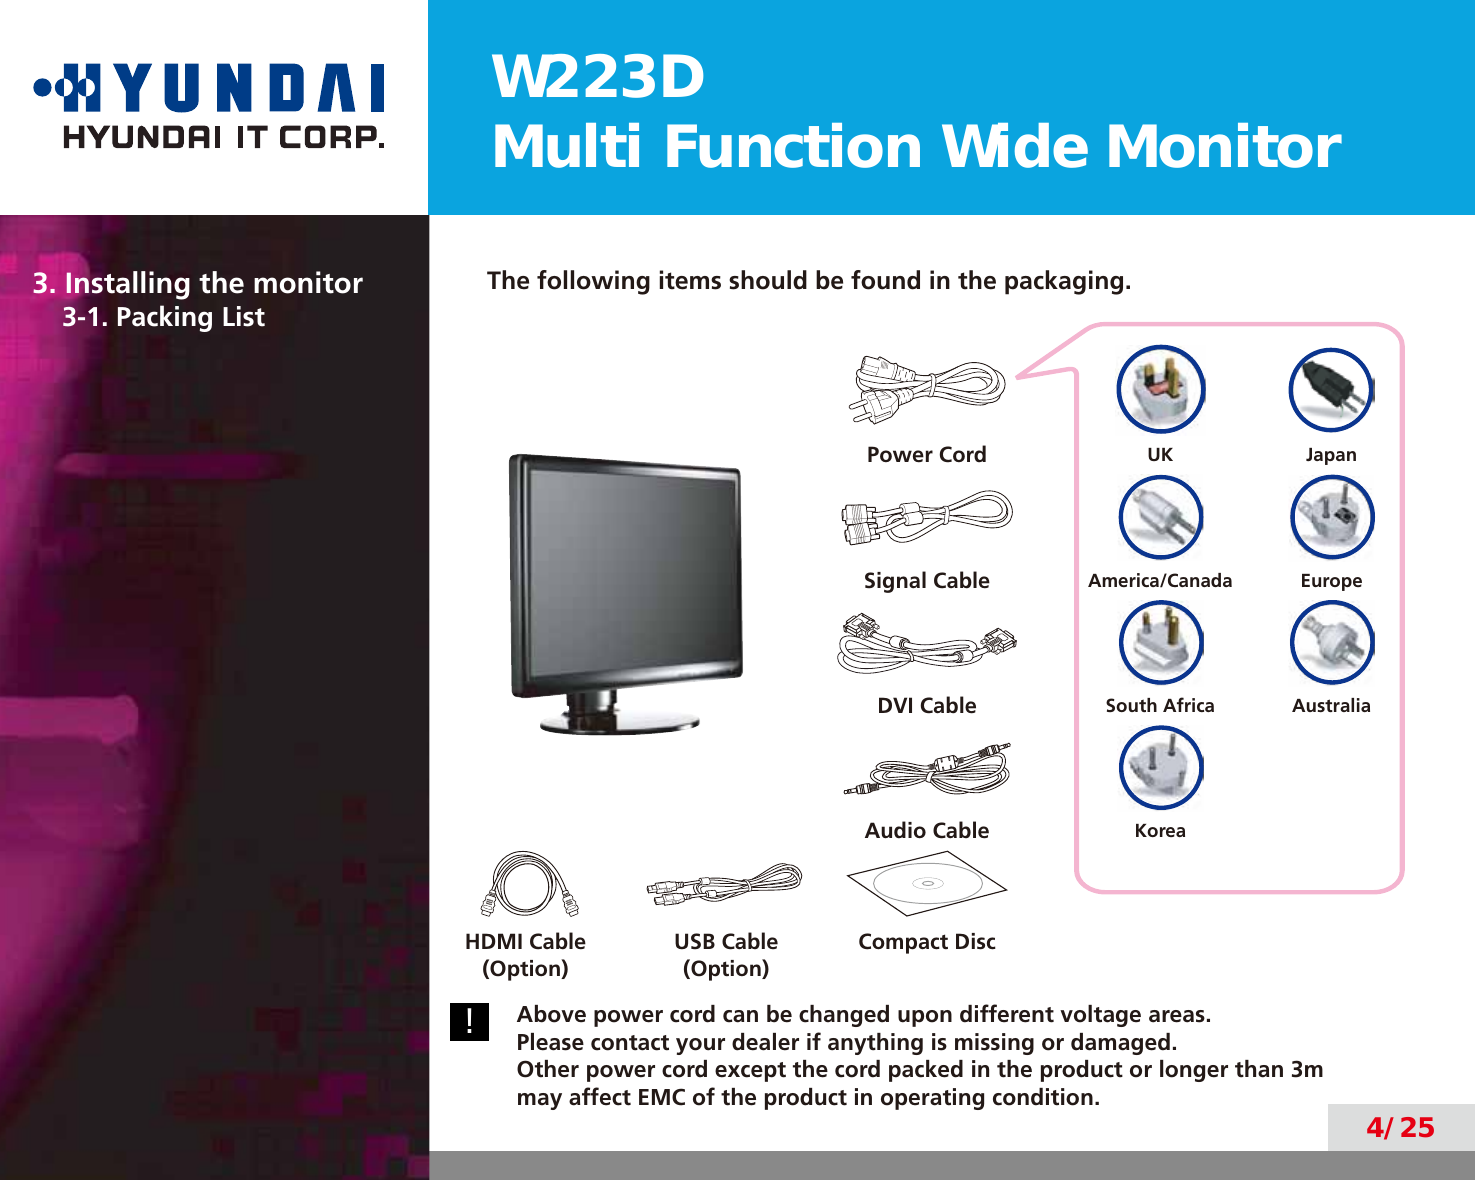 W223DMulti Function Wide Monitor4/253. Installing the monitor3-1. Packing ListThe following items should be found in the packaging.Power Cord UK JapanSignal Cable America/Canada EuropeDVI Cable South Africa AustraliaAudio Cable KoreaHDMI Cable(Option)USB Cable(Option)Compact Disc!Above power cord can be changed upon different voltage areas.  Please contact your dealer if anything is missing or damaged.  Other power cord except the cord packed in the product or longer than 3m  may affect EMC of the product in operating condition.